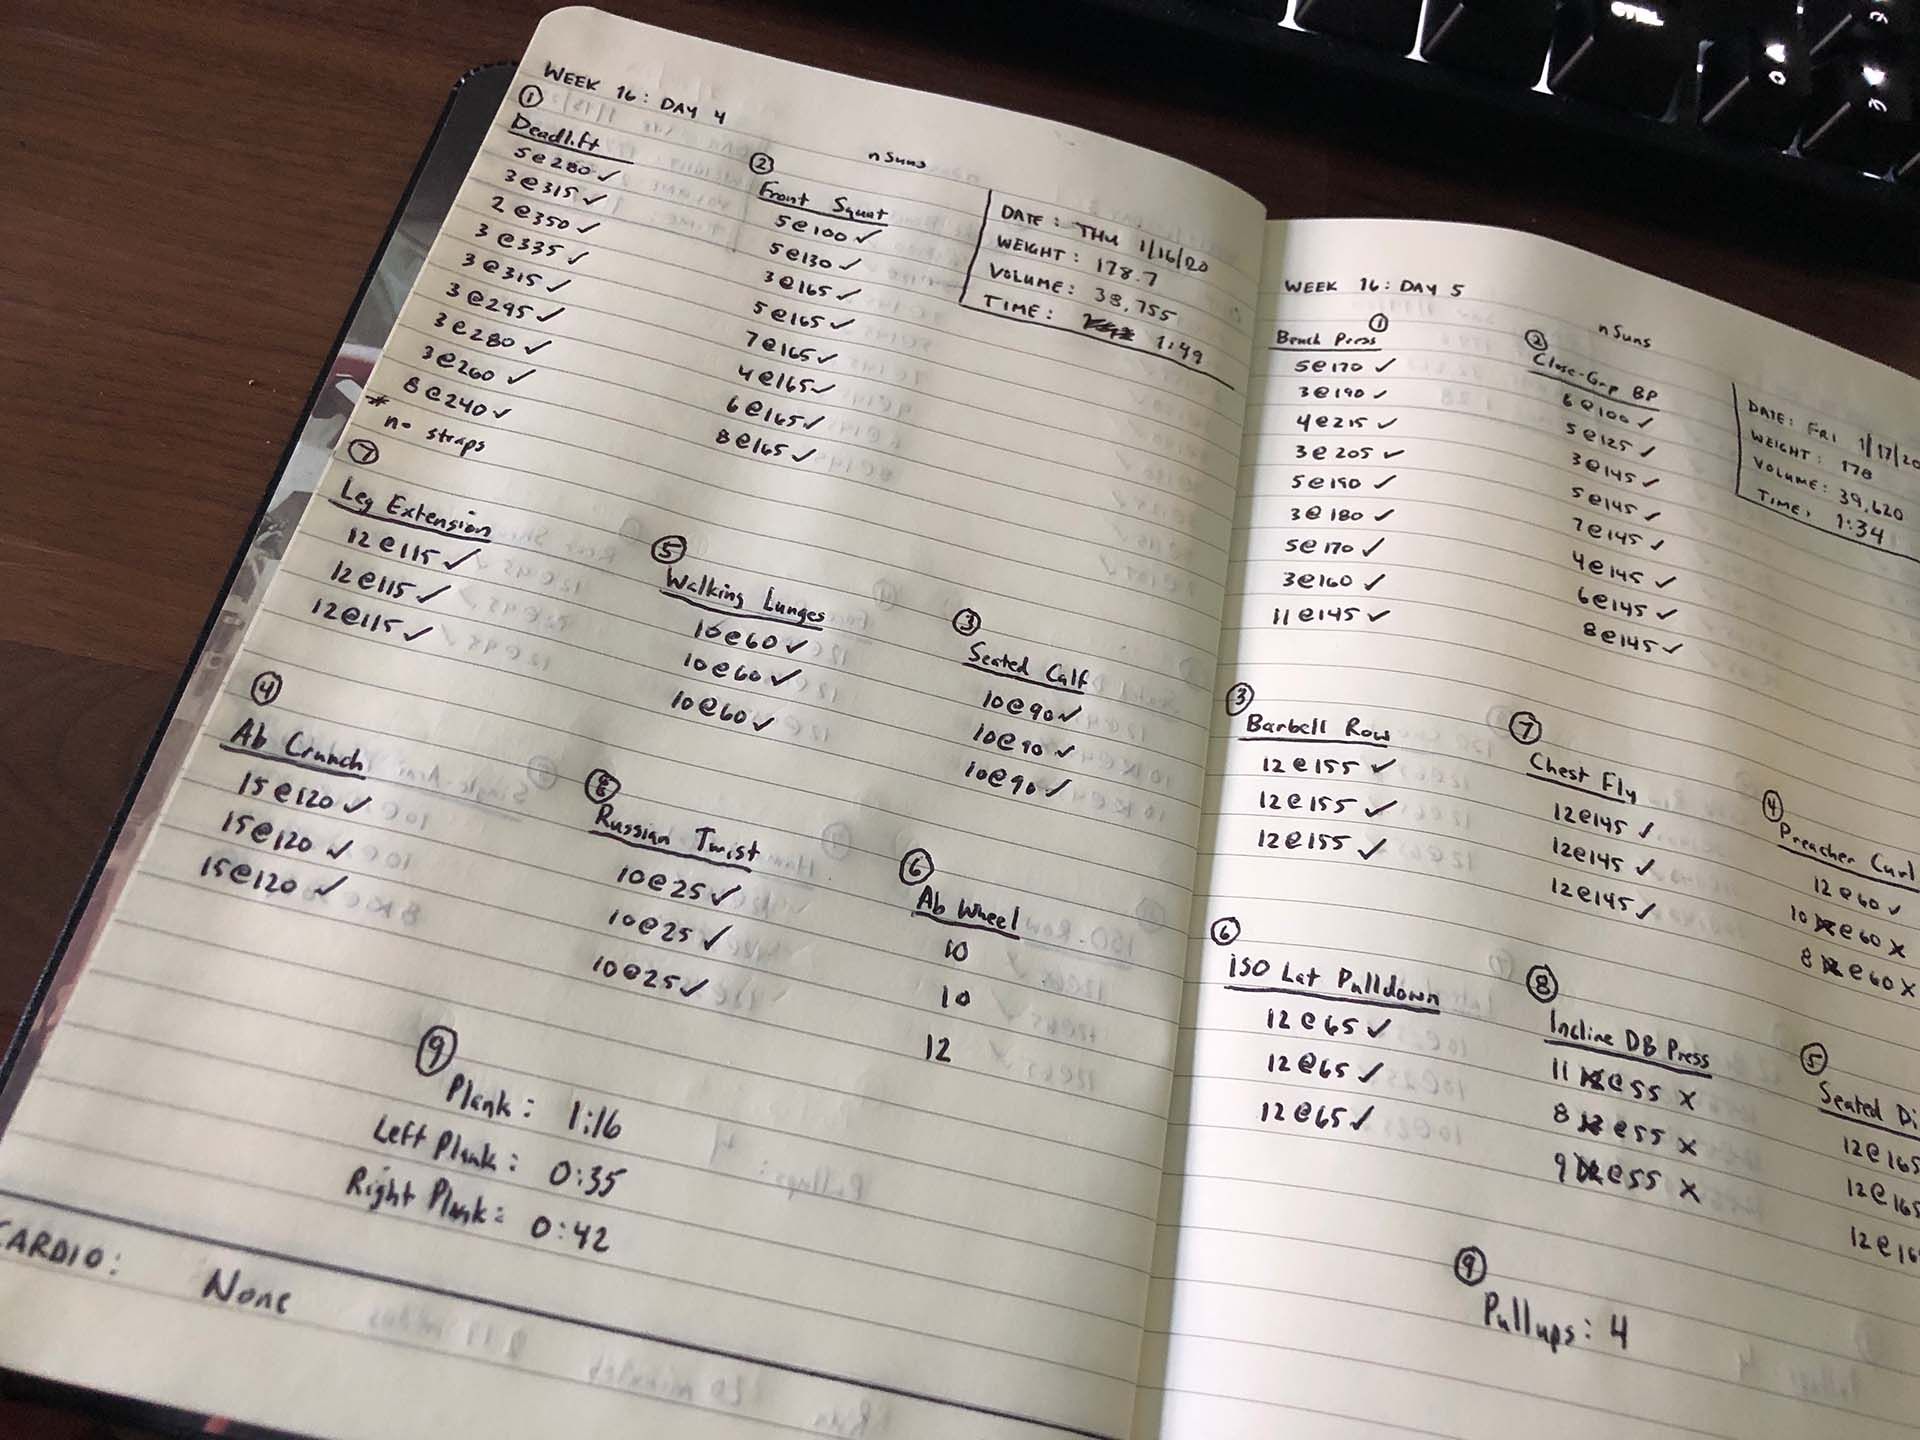 My Moleskine notebook for tracking my lifts